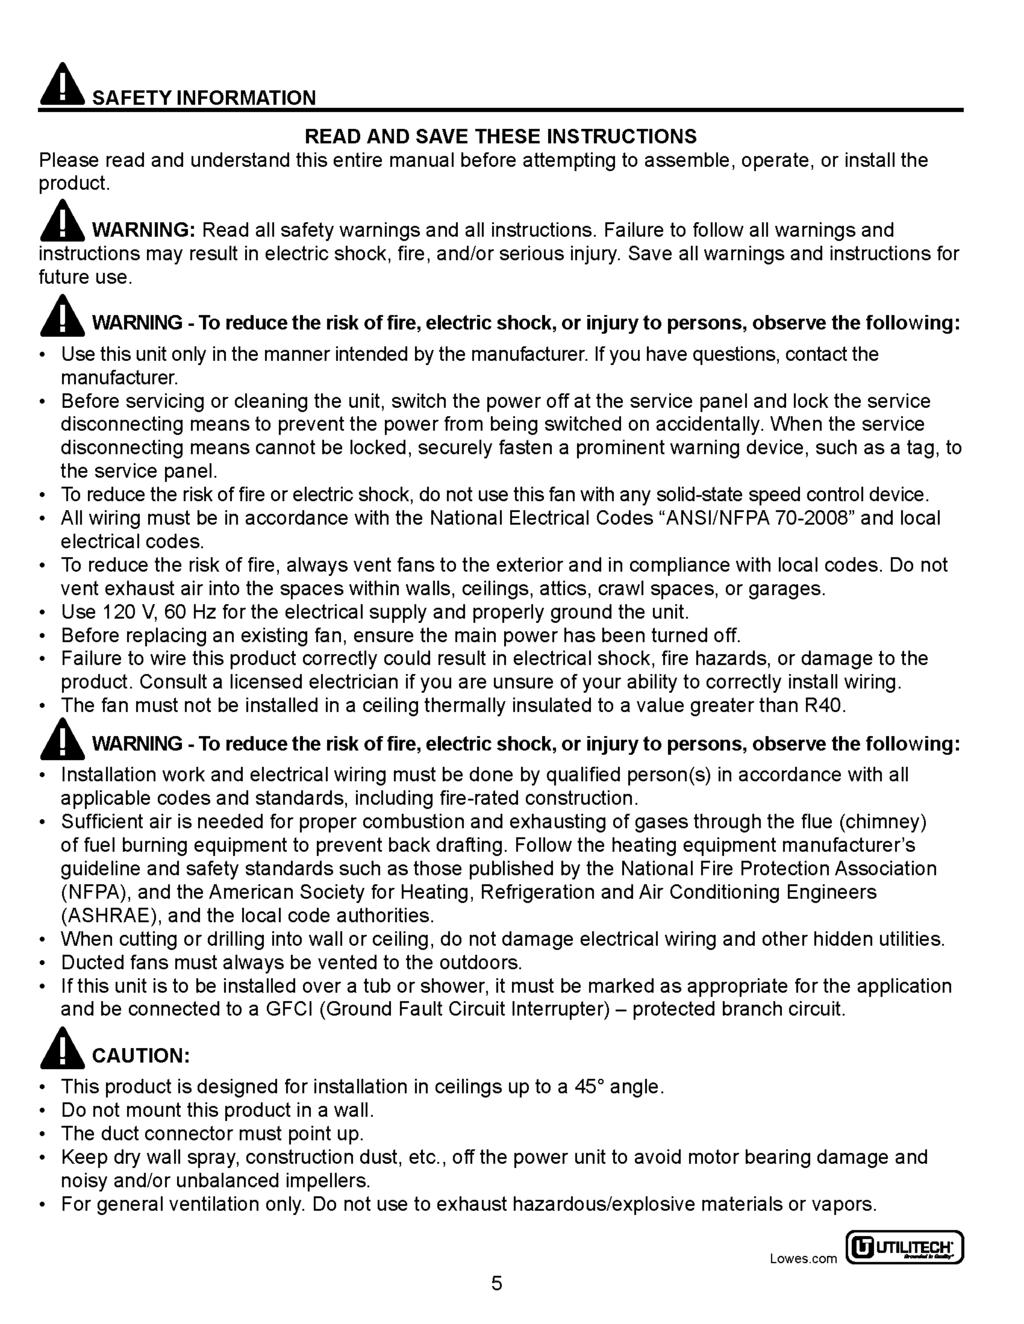 A SAFETY INFORMATION READ AND SAVE THESE INSTRUCTIONS Please read and understand this entire manual before attempting to assemble, operate, or install the product.